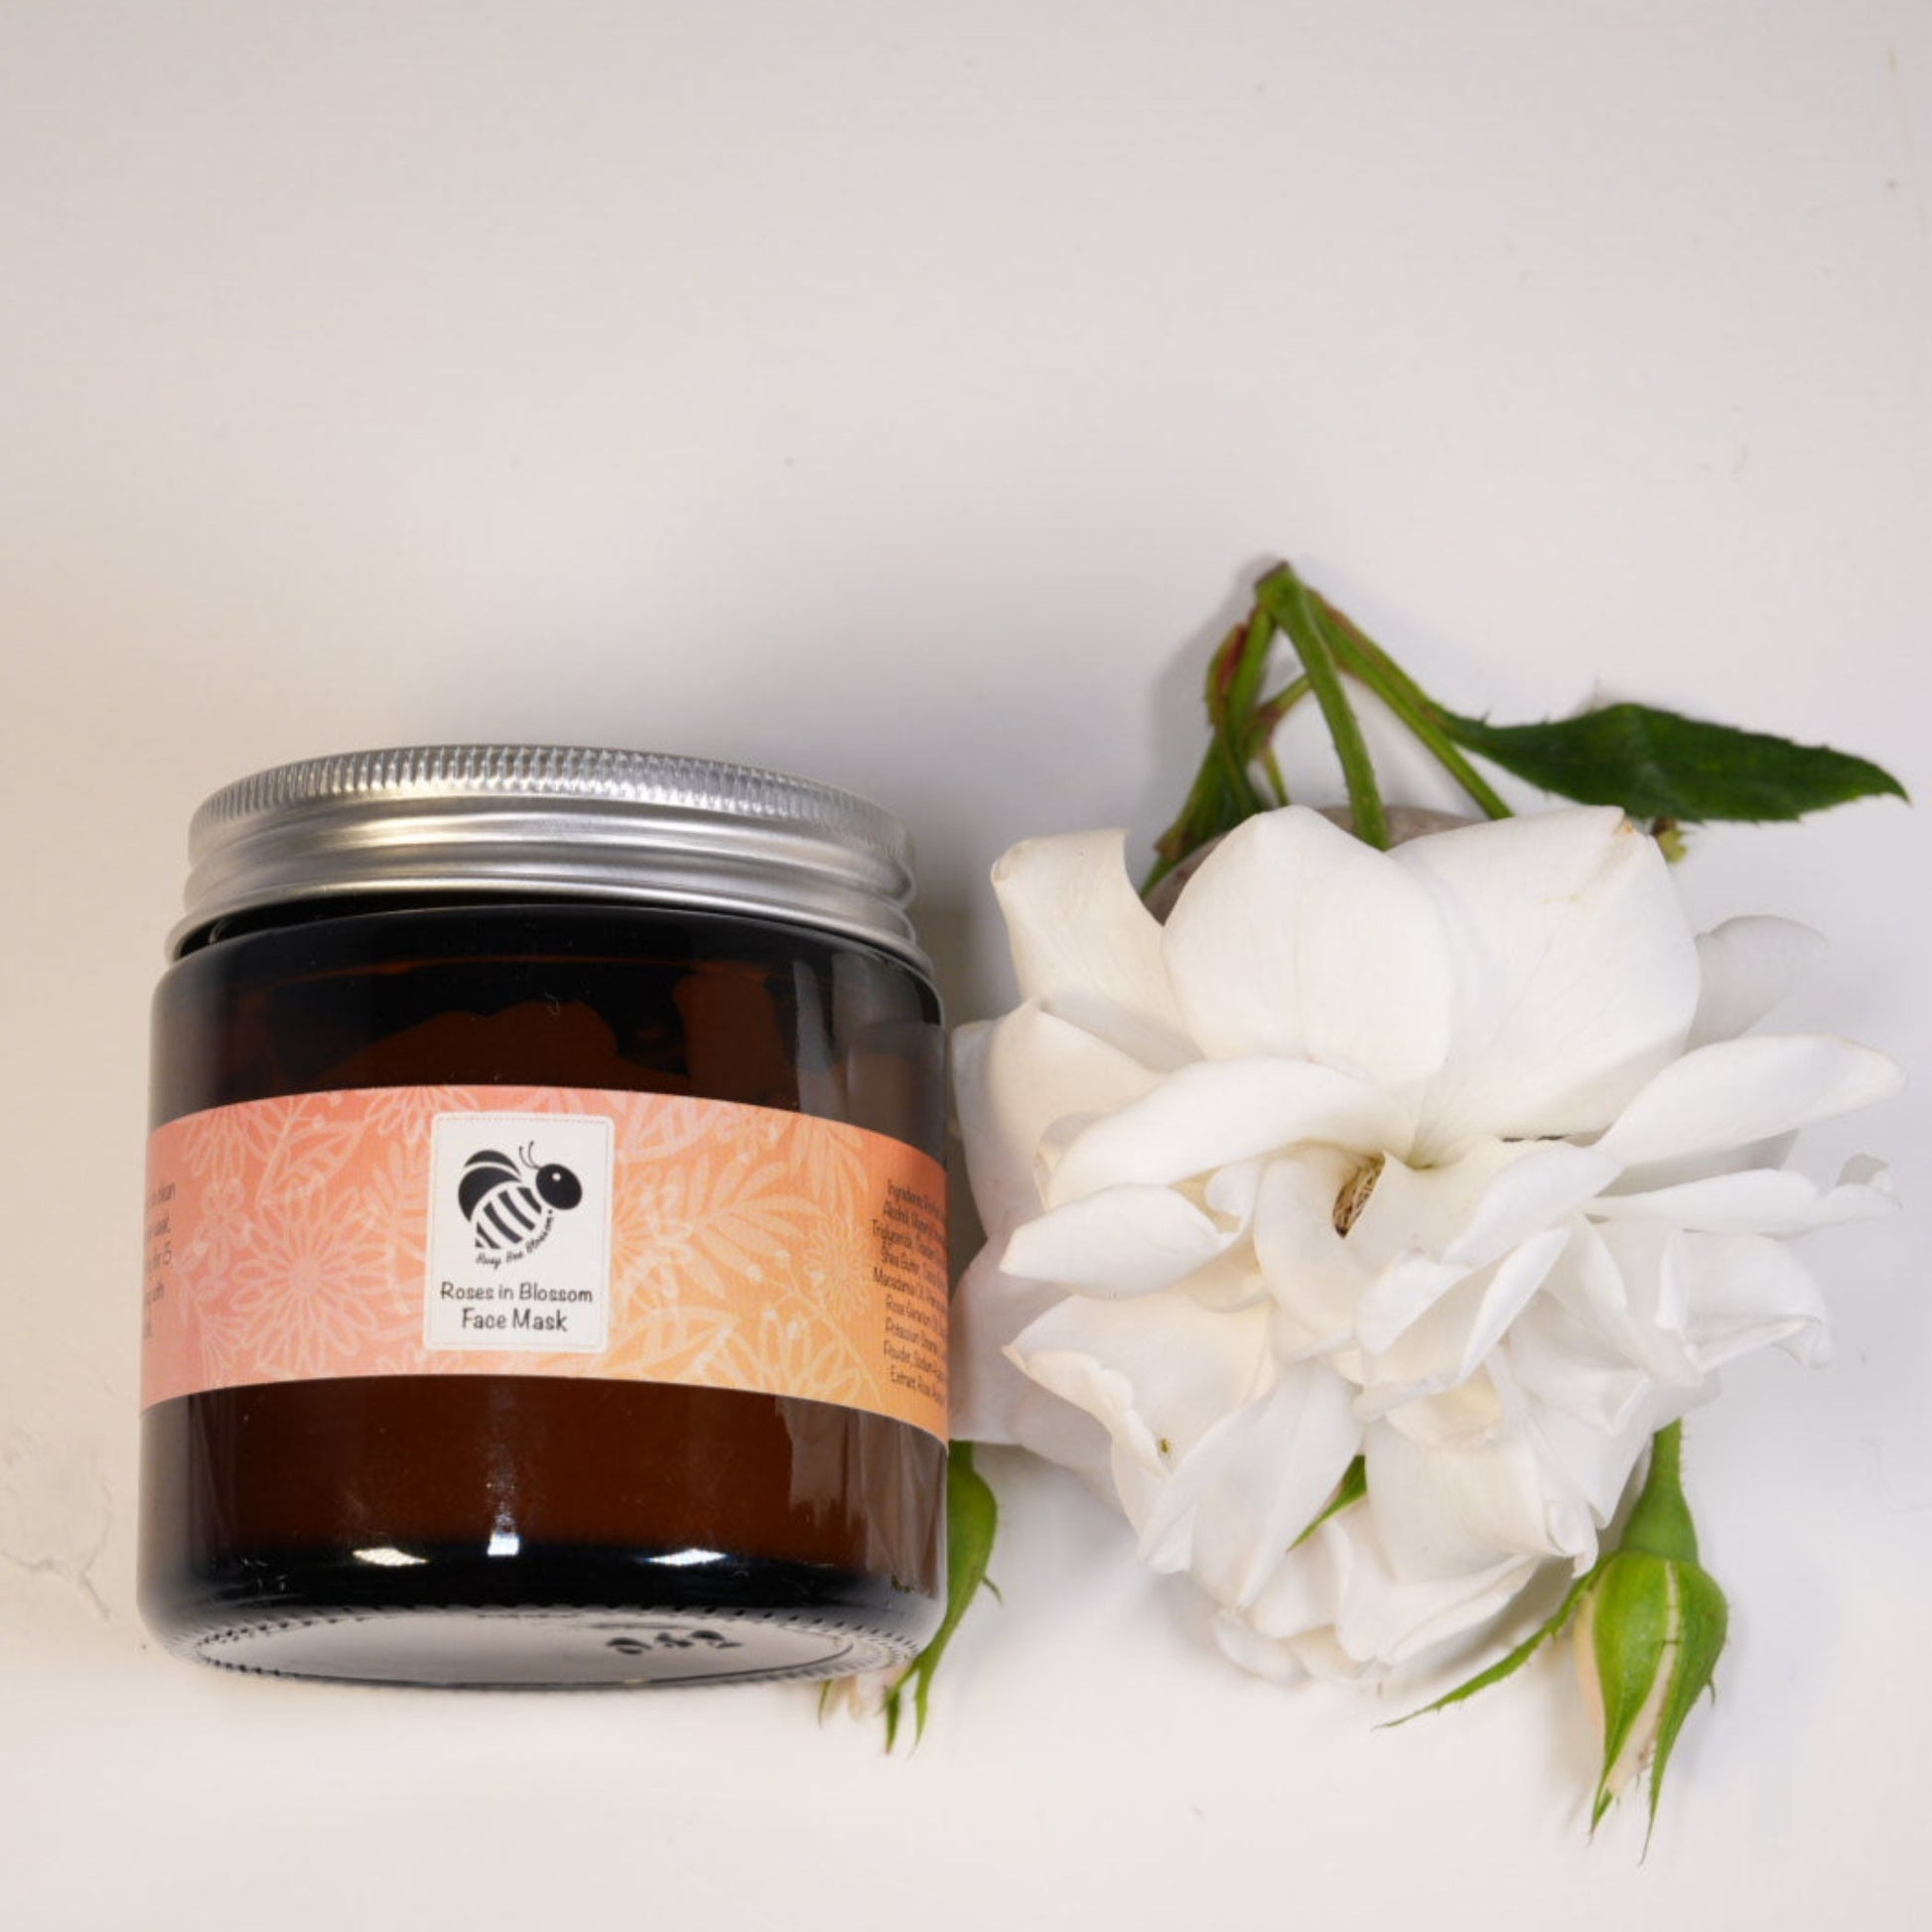 Roses in blossom cream face mask in an amber glass jar with roses